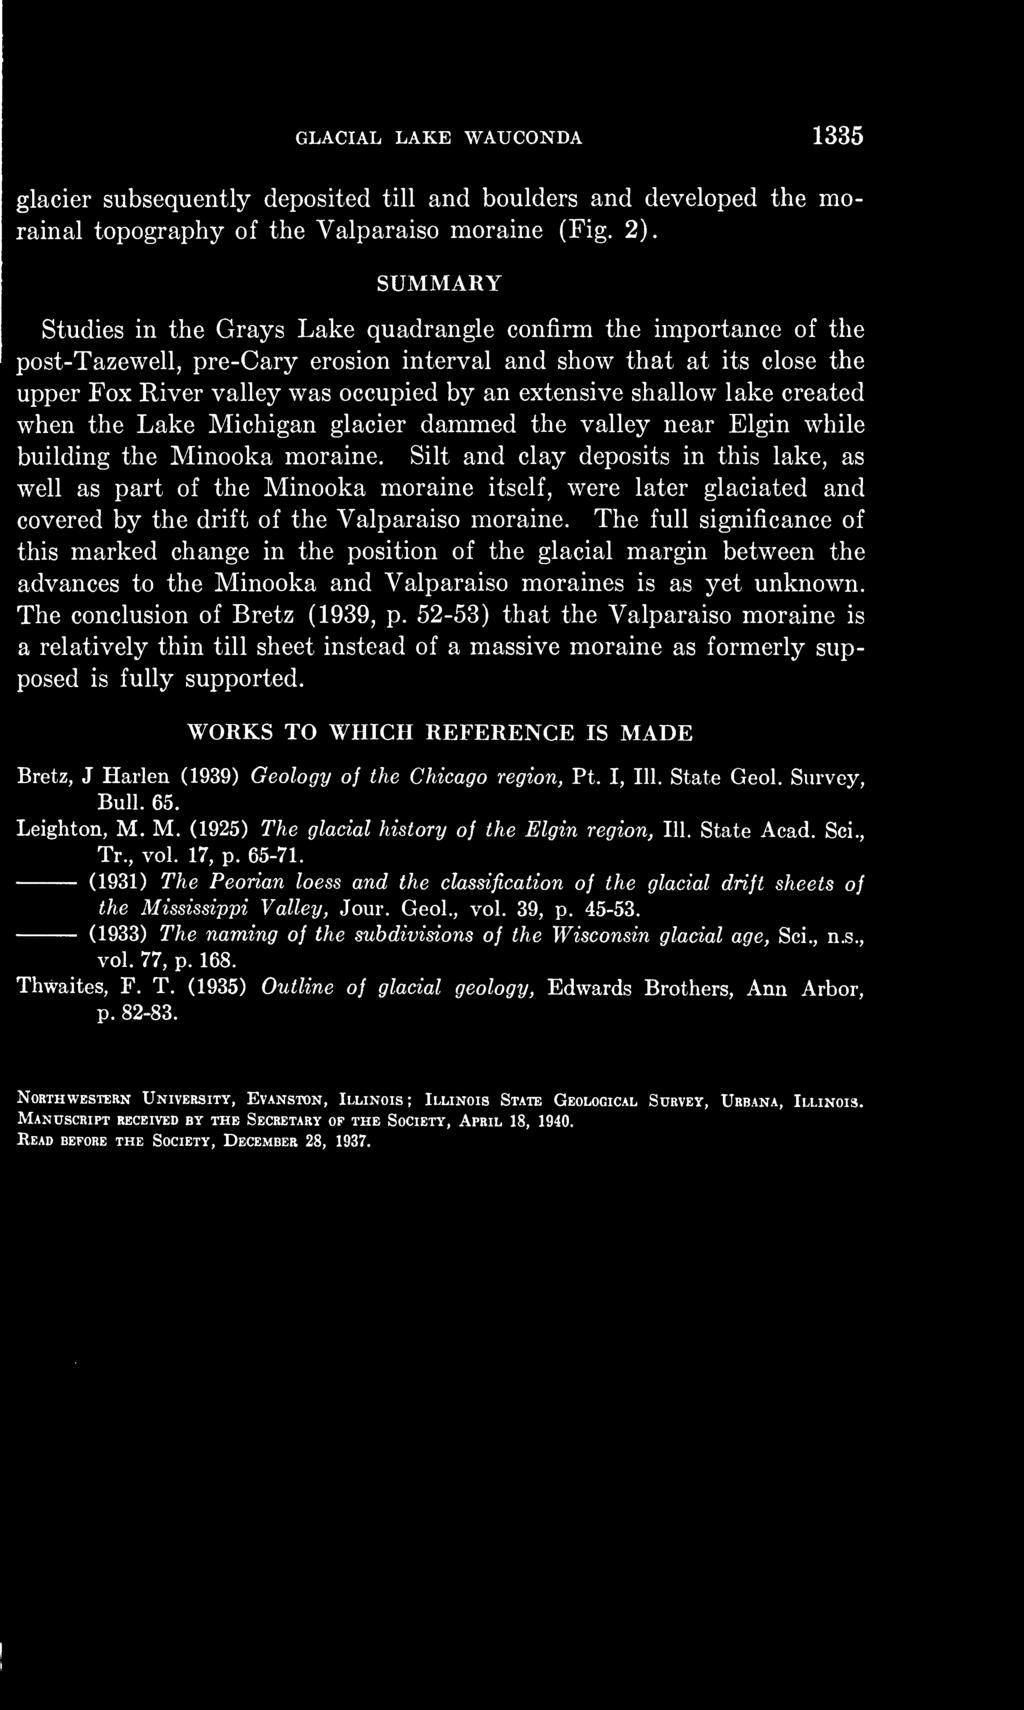 The full significance of this marked change in the position of the glacial margin between the advances to the Minooka and Valparaiso moraines is as yet unknown. The conclusion of Bretz (1939, p.